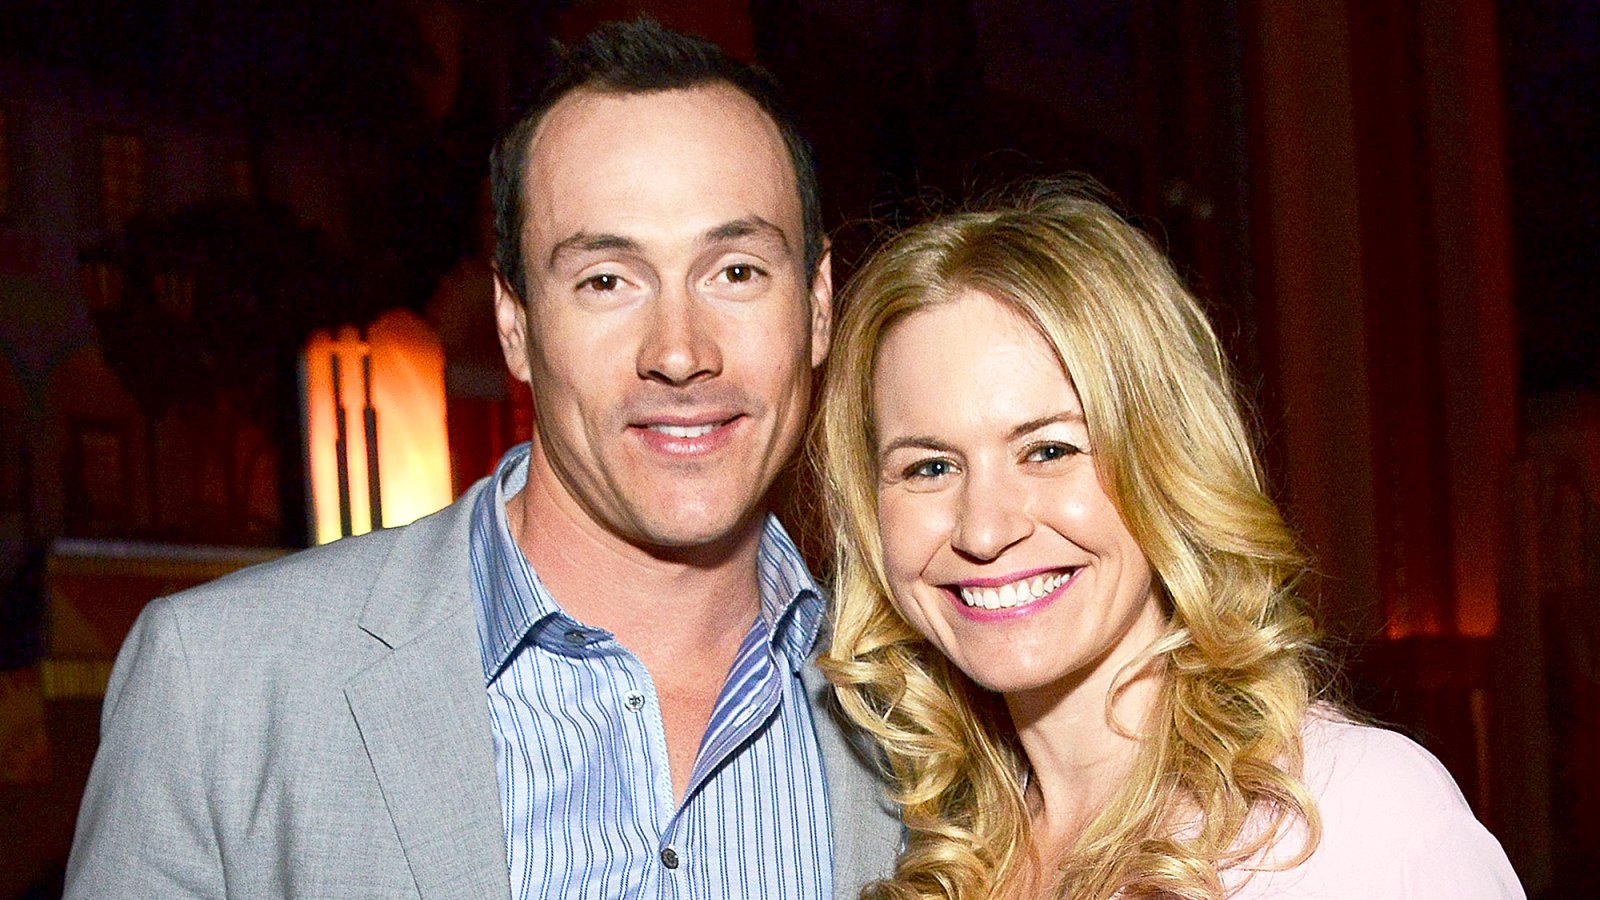 Chris Klein and his wife Laina Rose Thyfault attend the Screen Media Films' 2014 premiere of 'Authors Anonymous' in Westwood, California.